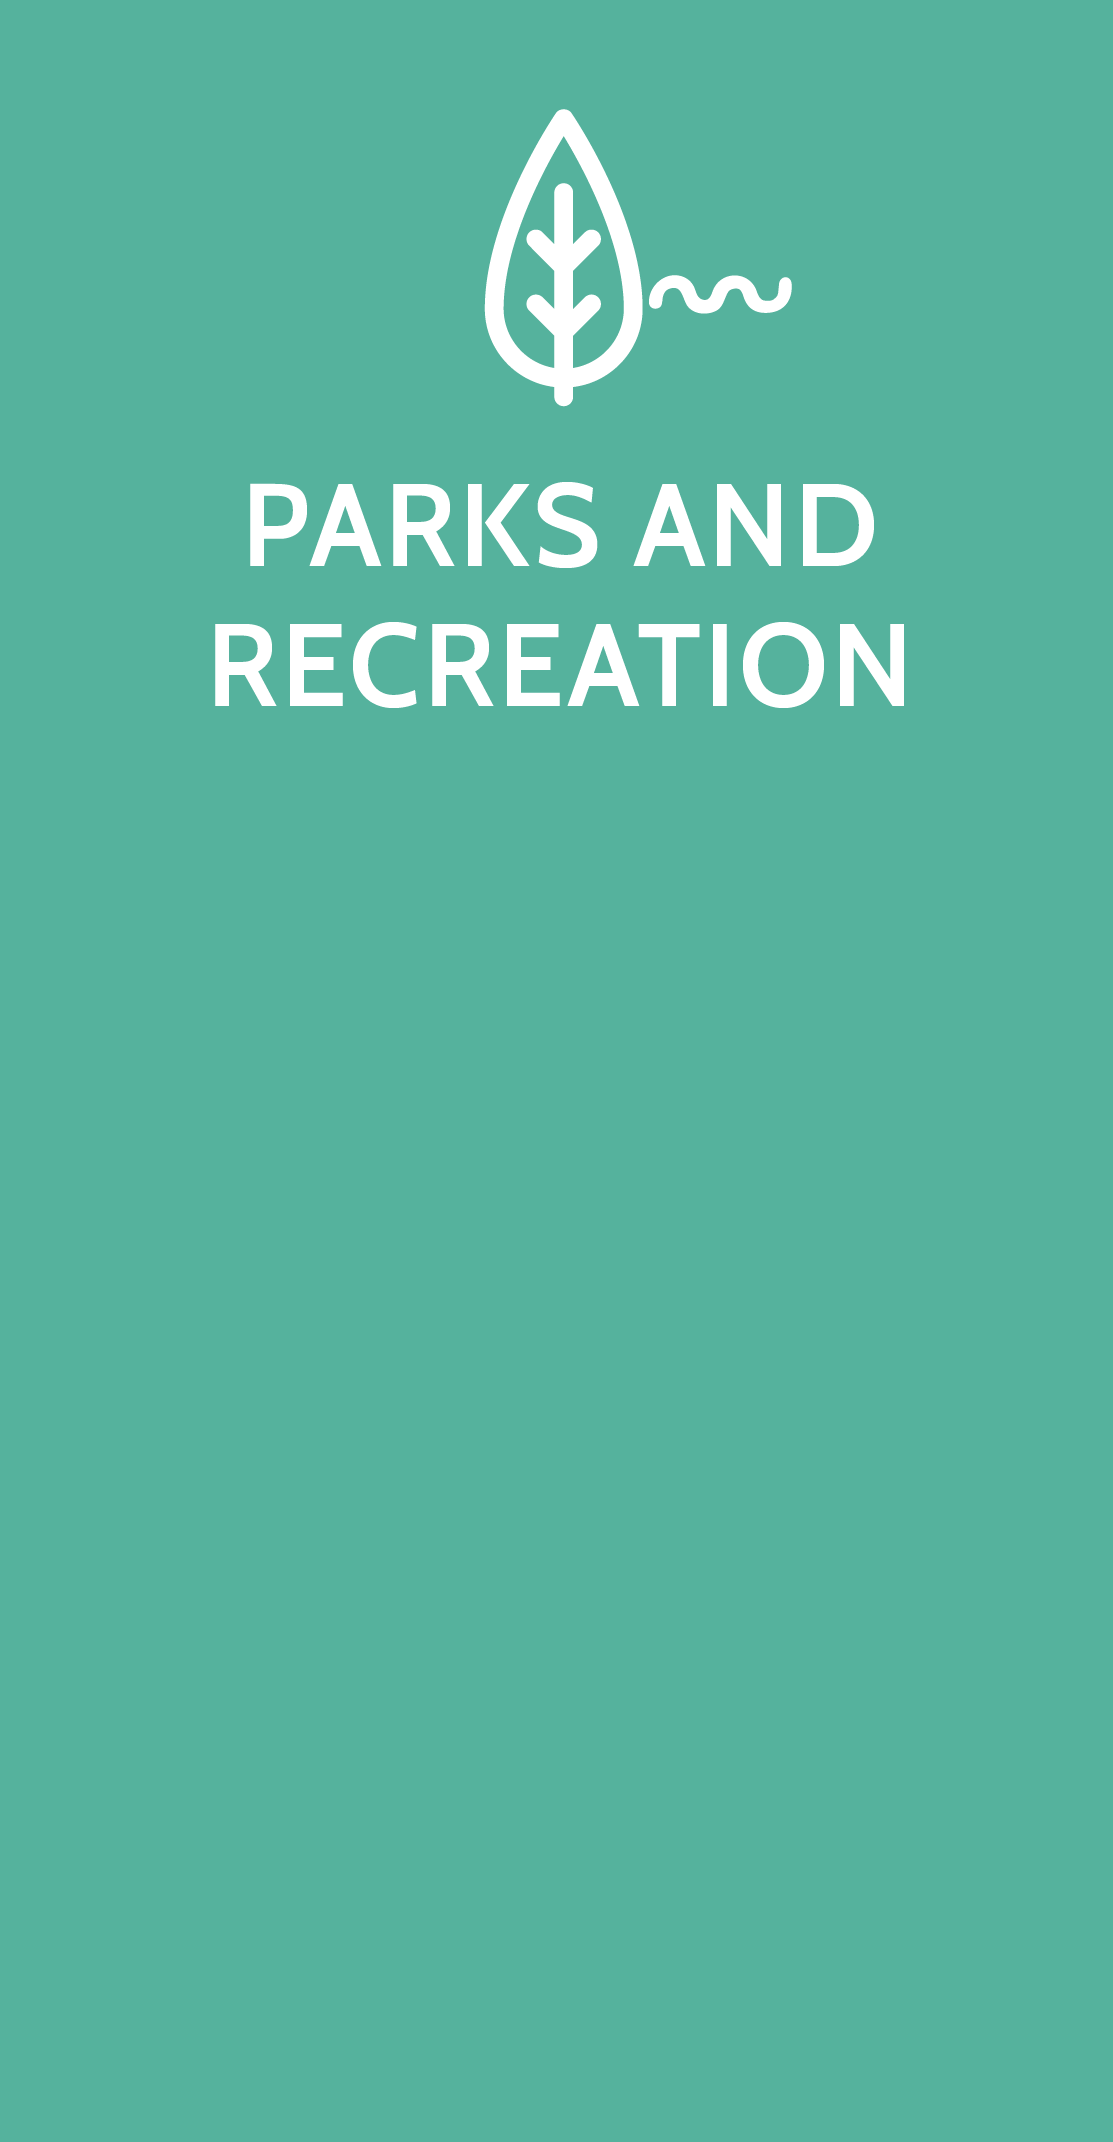 Parks and Recreation Study